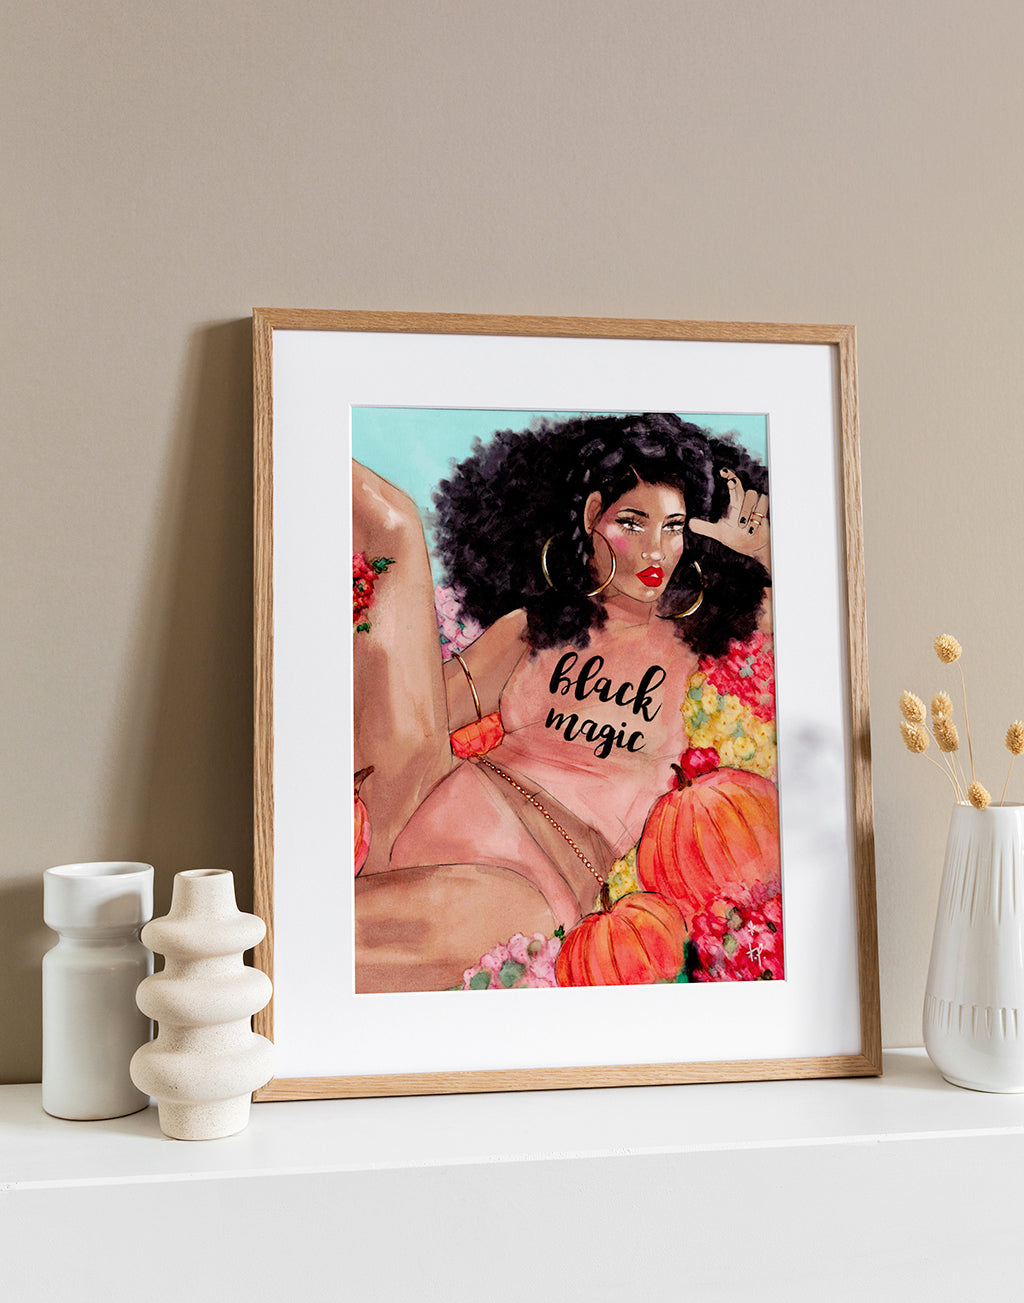 Illustration in a light frame of a beautiful woman with big curly hair wearing a black magic tee and sitting in a pumpkin patch by Tatiana Poblah